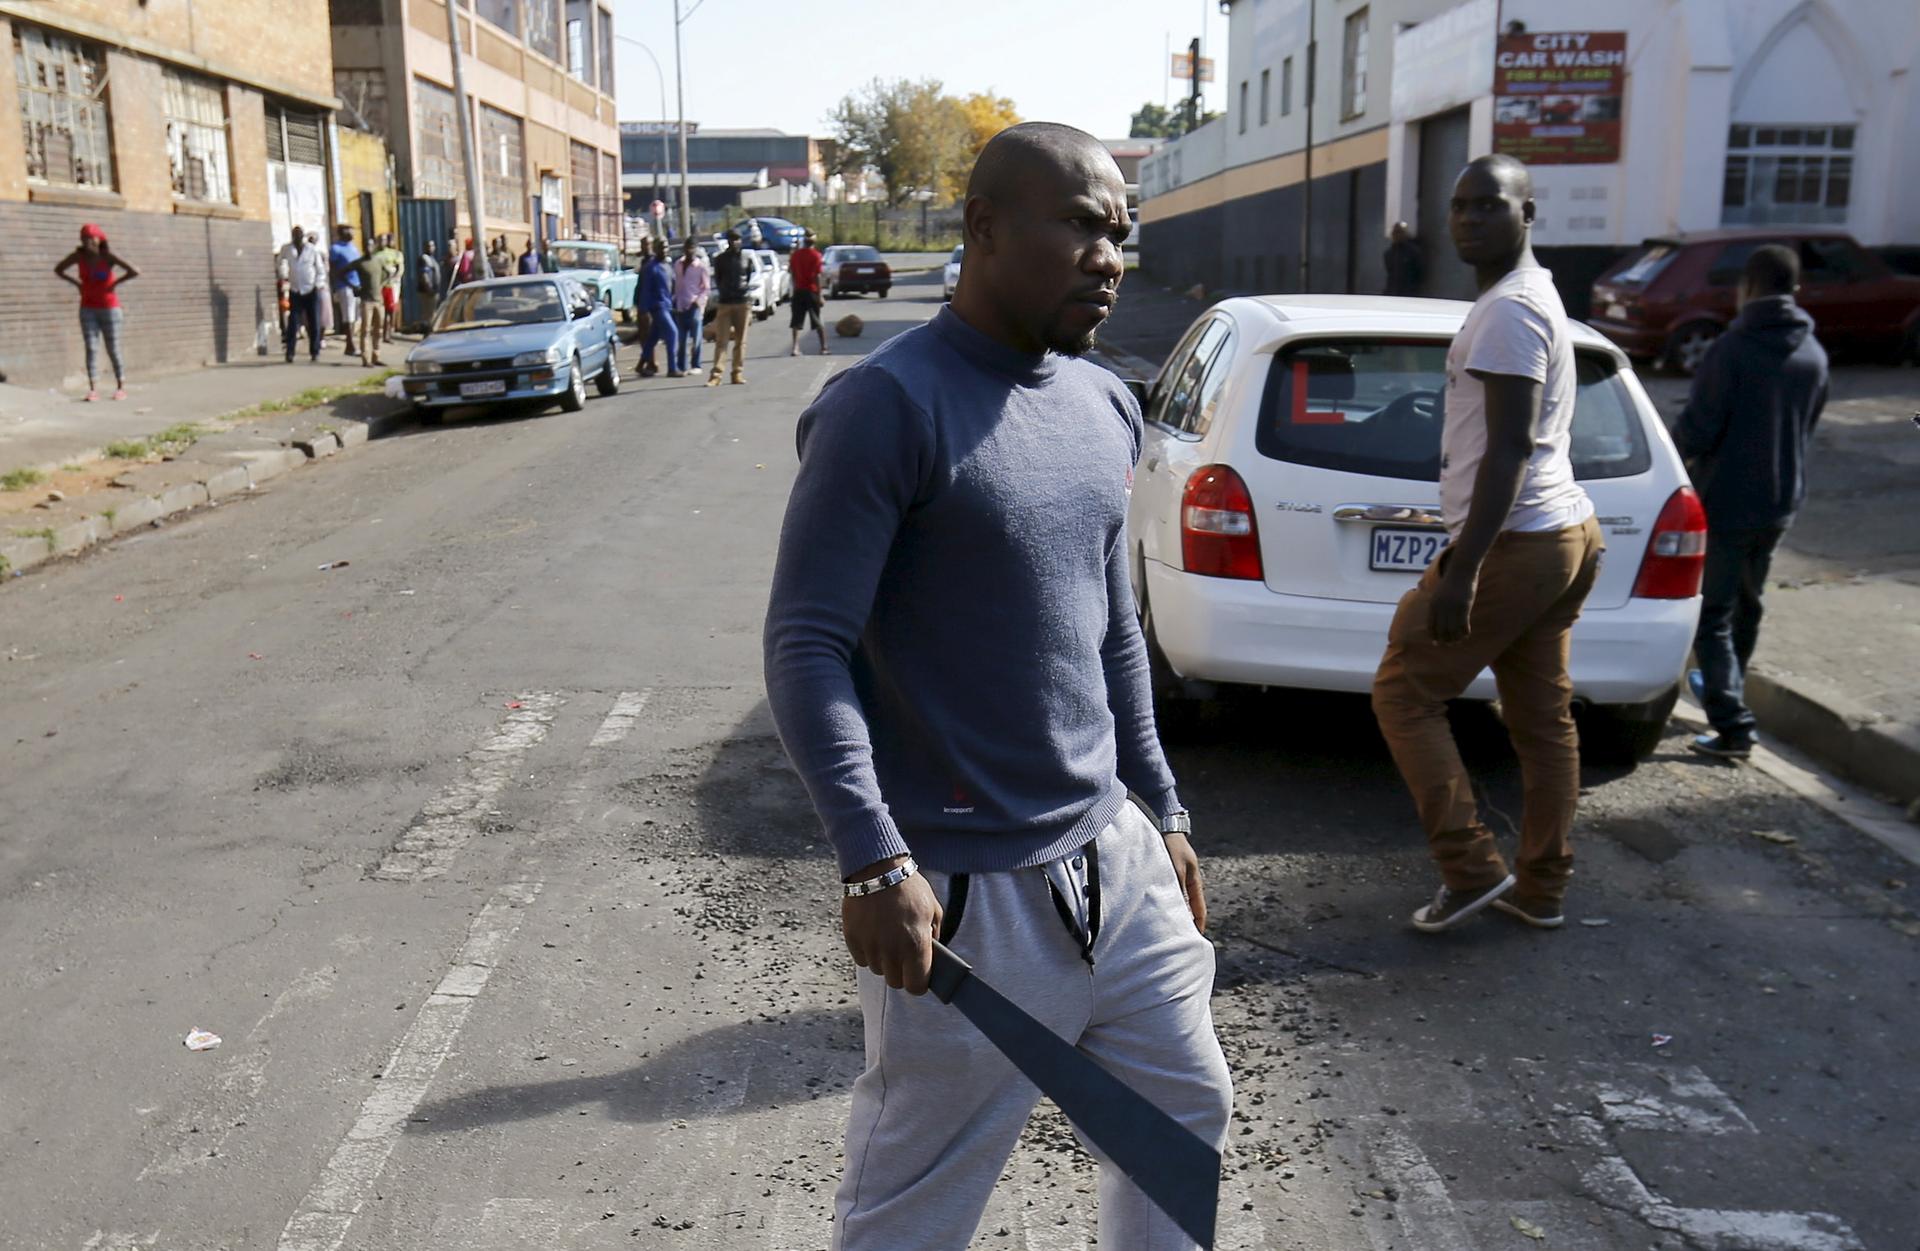 An African immigrant holds a machete in Johannesburg, South Africa. Immigrants have complained about a lack of police protection and some have started to arm themselves.